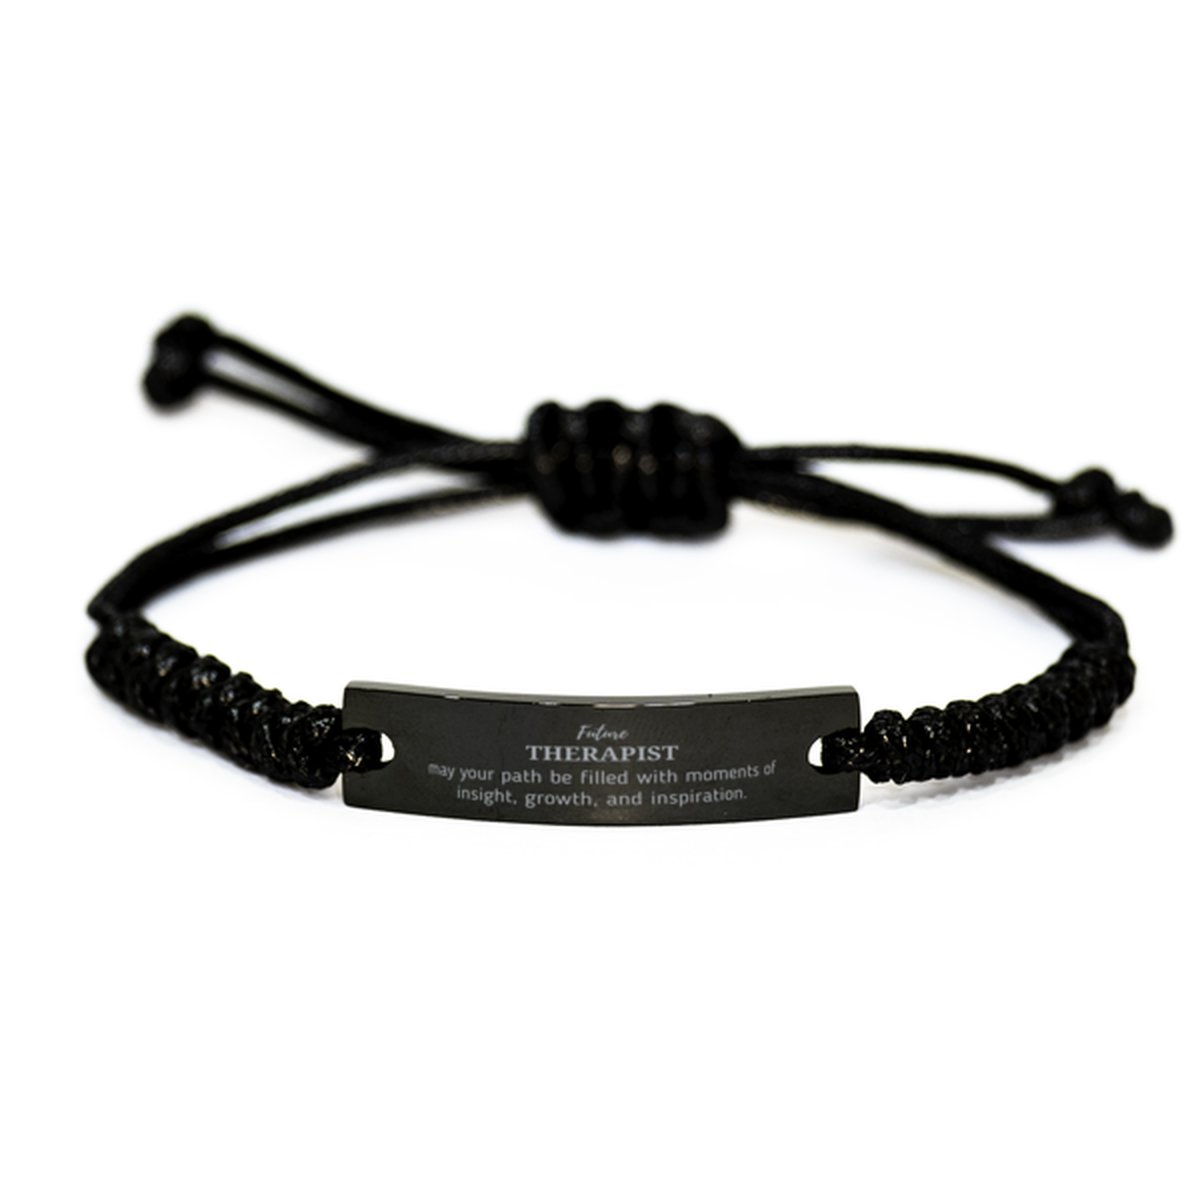 Future Therapist Gifts, May your path be filled with moments of insight, Graduation Gifts for New Therapist, Christmas Unique Black Rope Bracelet For Men, Women, Friends